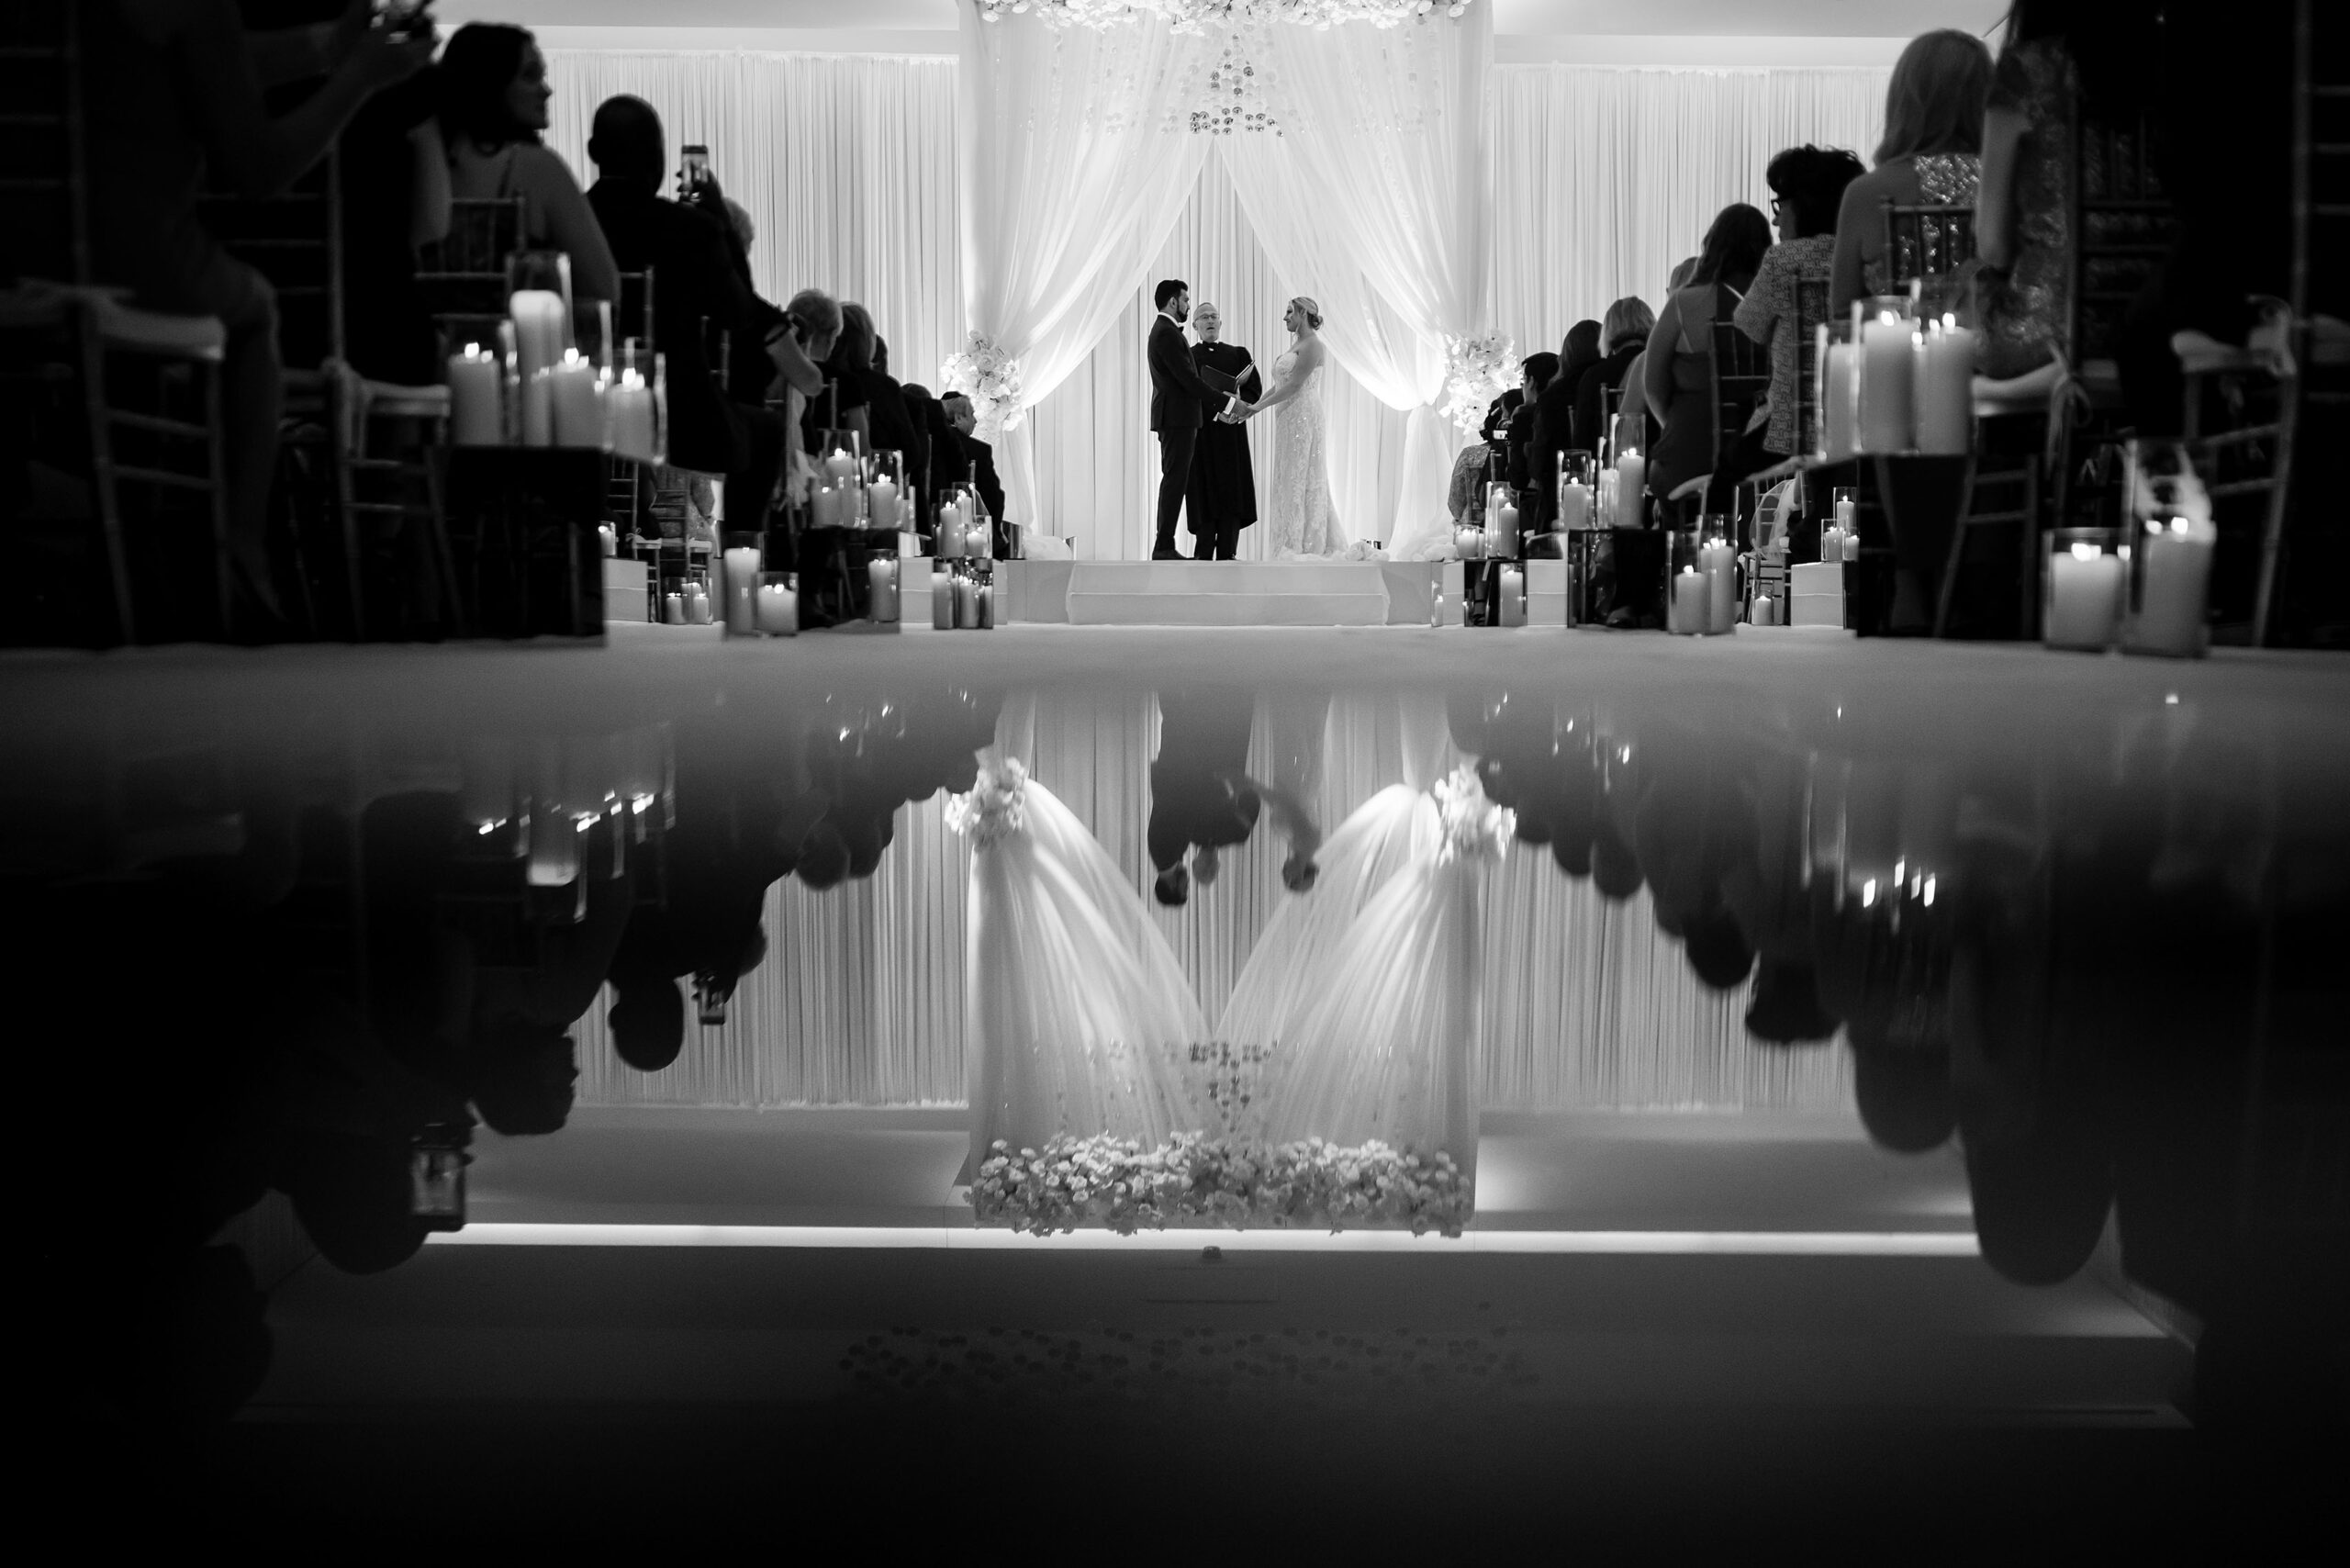 The ceremony is reflected in the floor at Four Seasons Hotel Denver